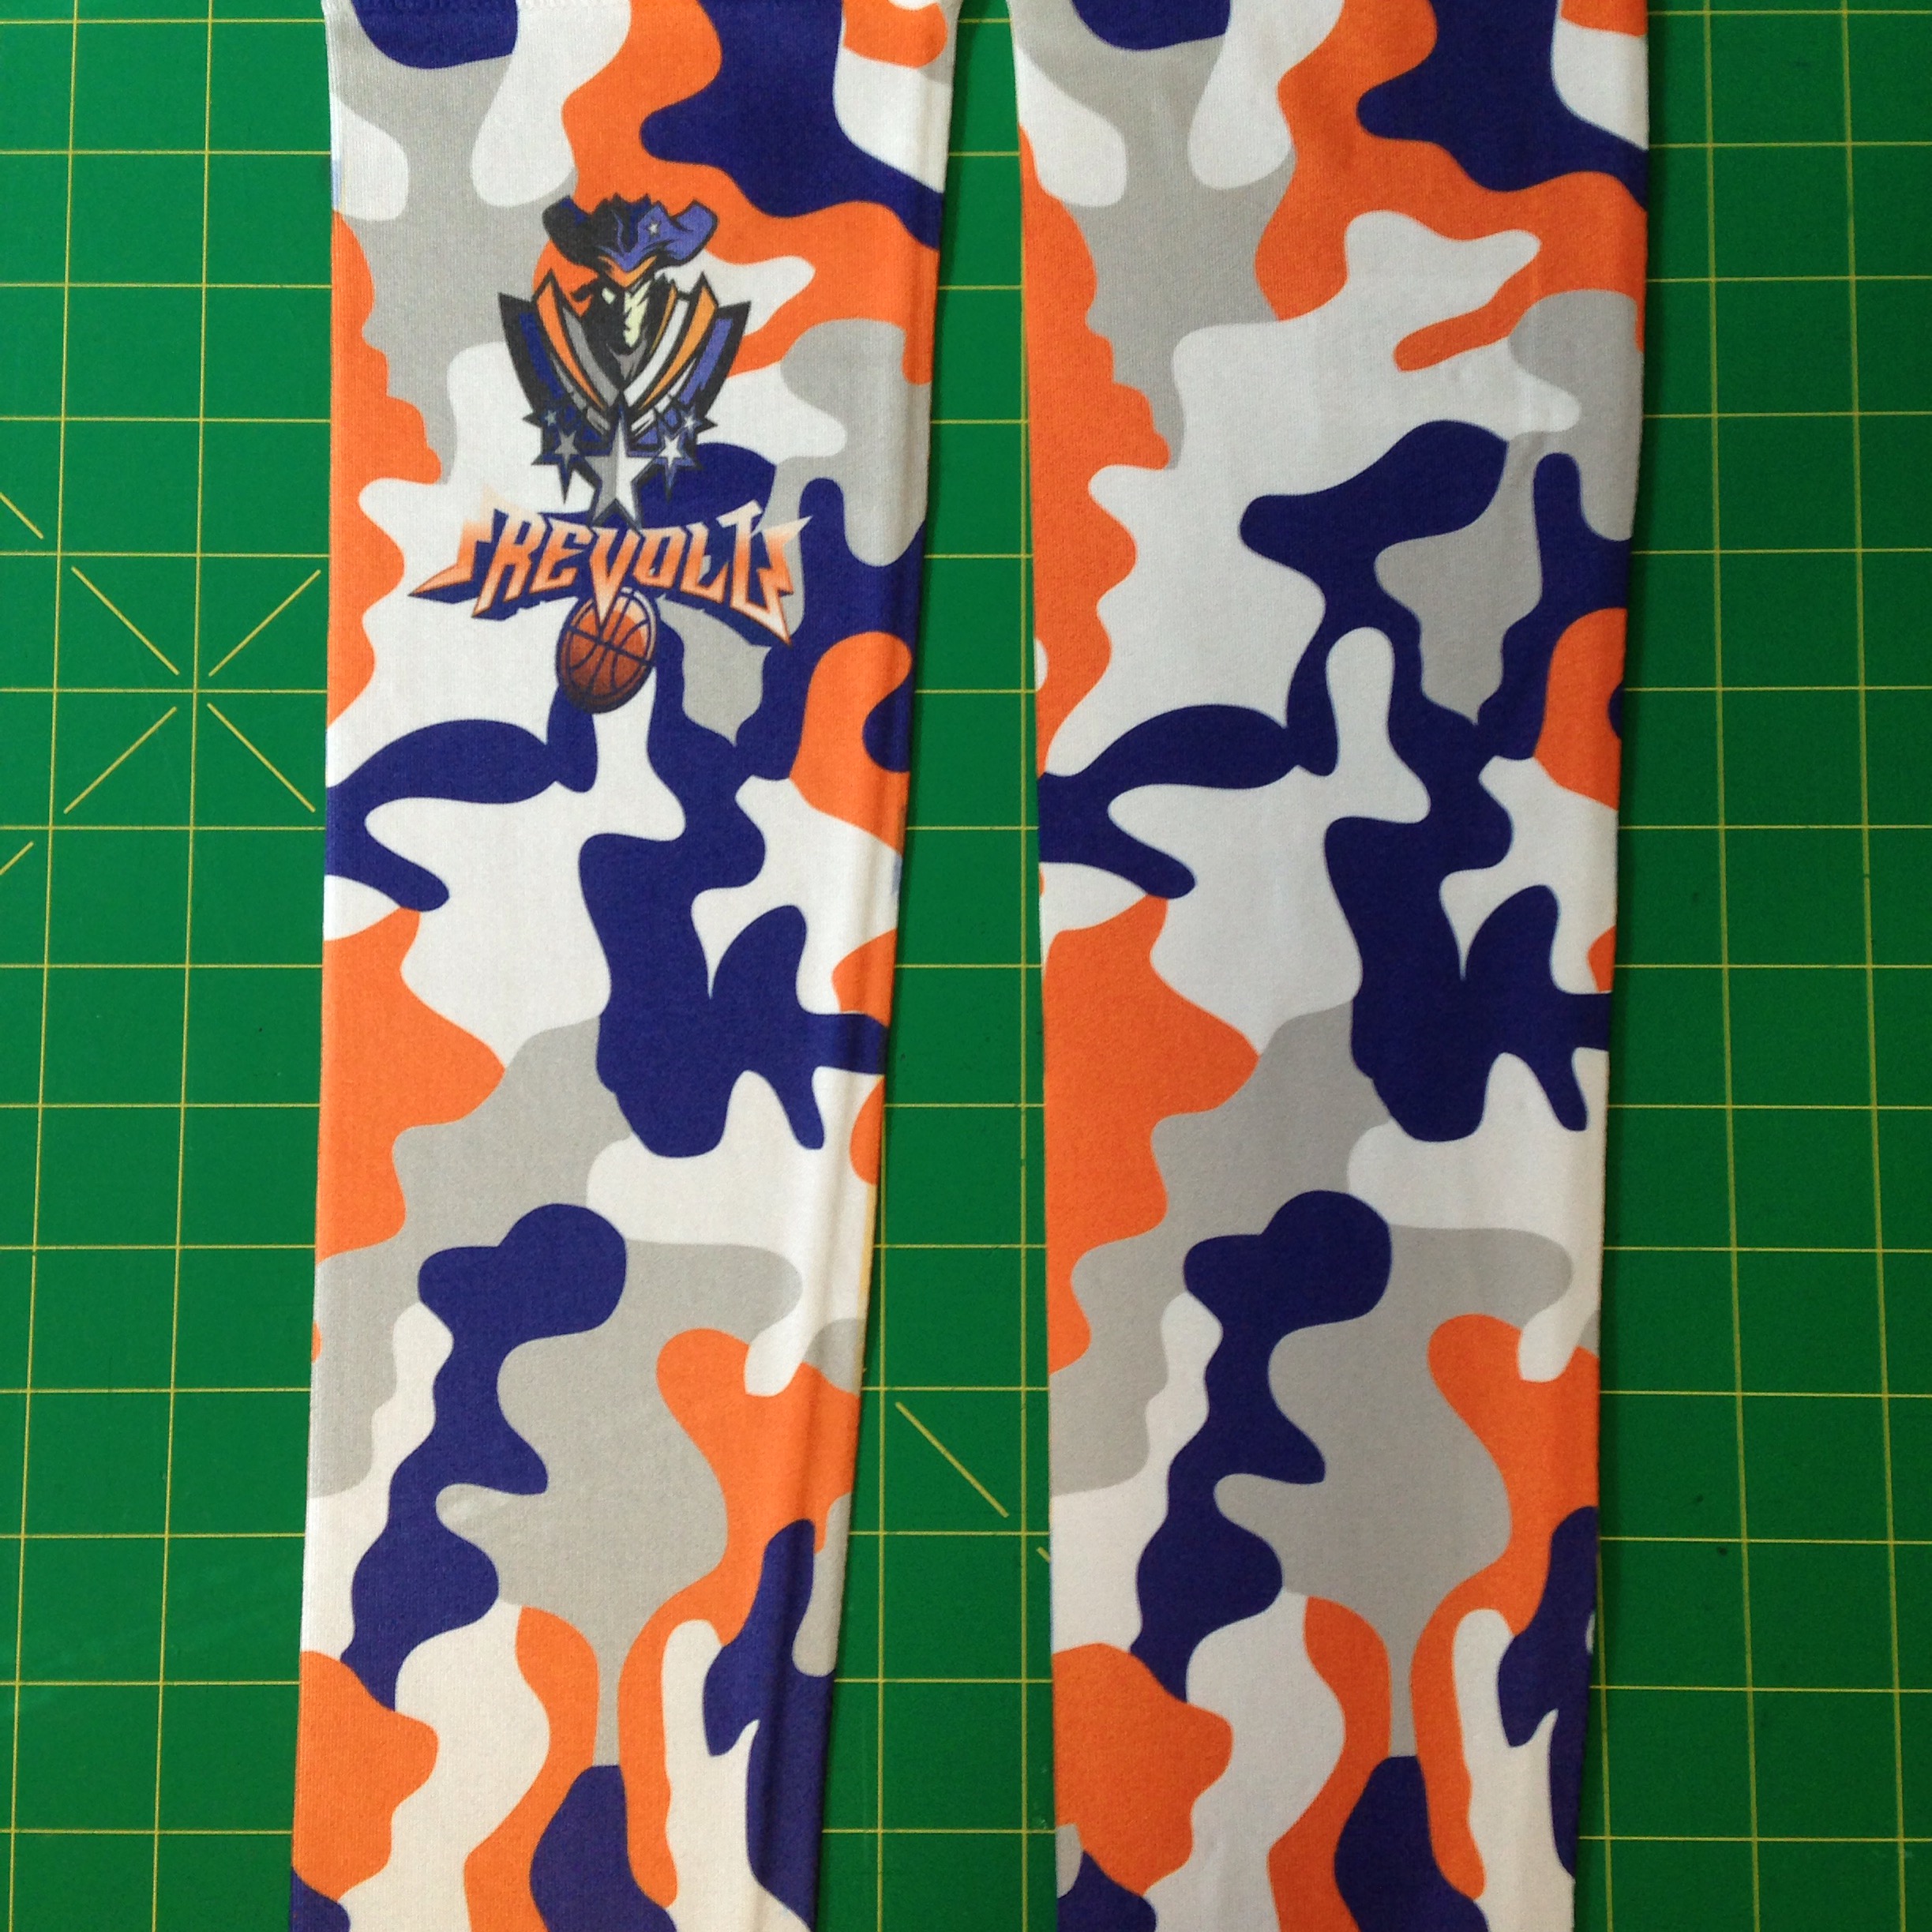 SemiPro Basketball Sleeves made with sublimation printing